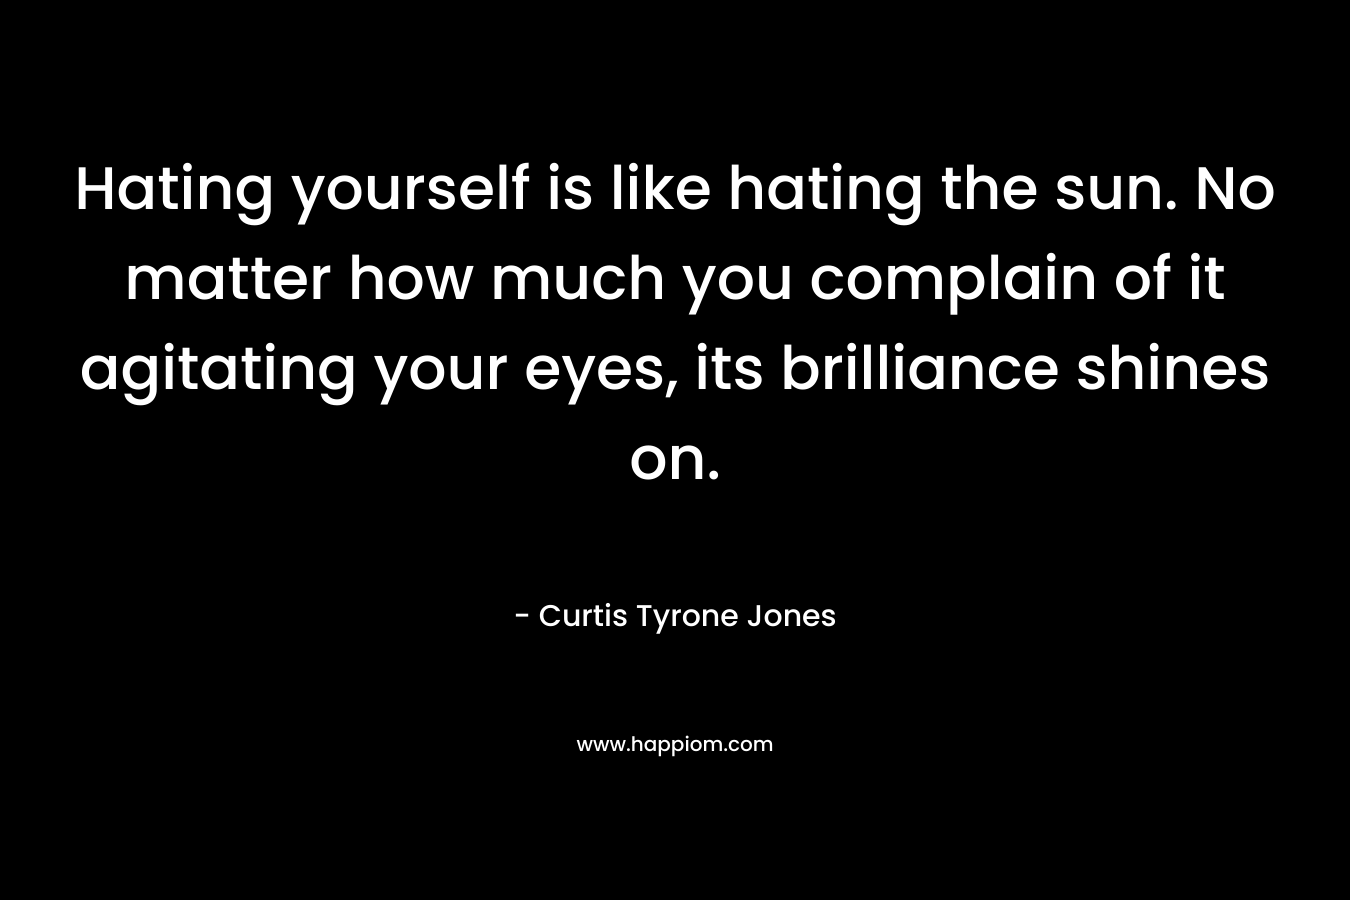 Hating yourself is like hating the sun. No matter how much you complain of it agitating your eyes, its brilliance shines on.